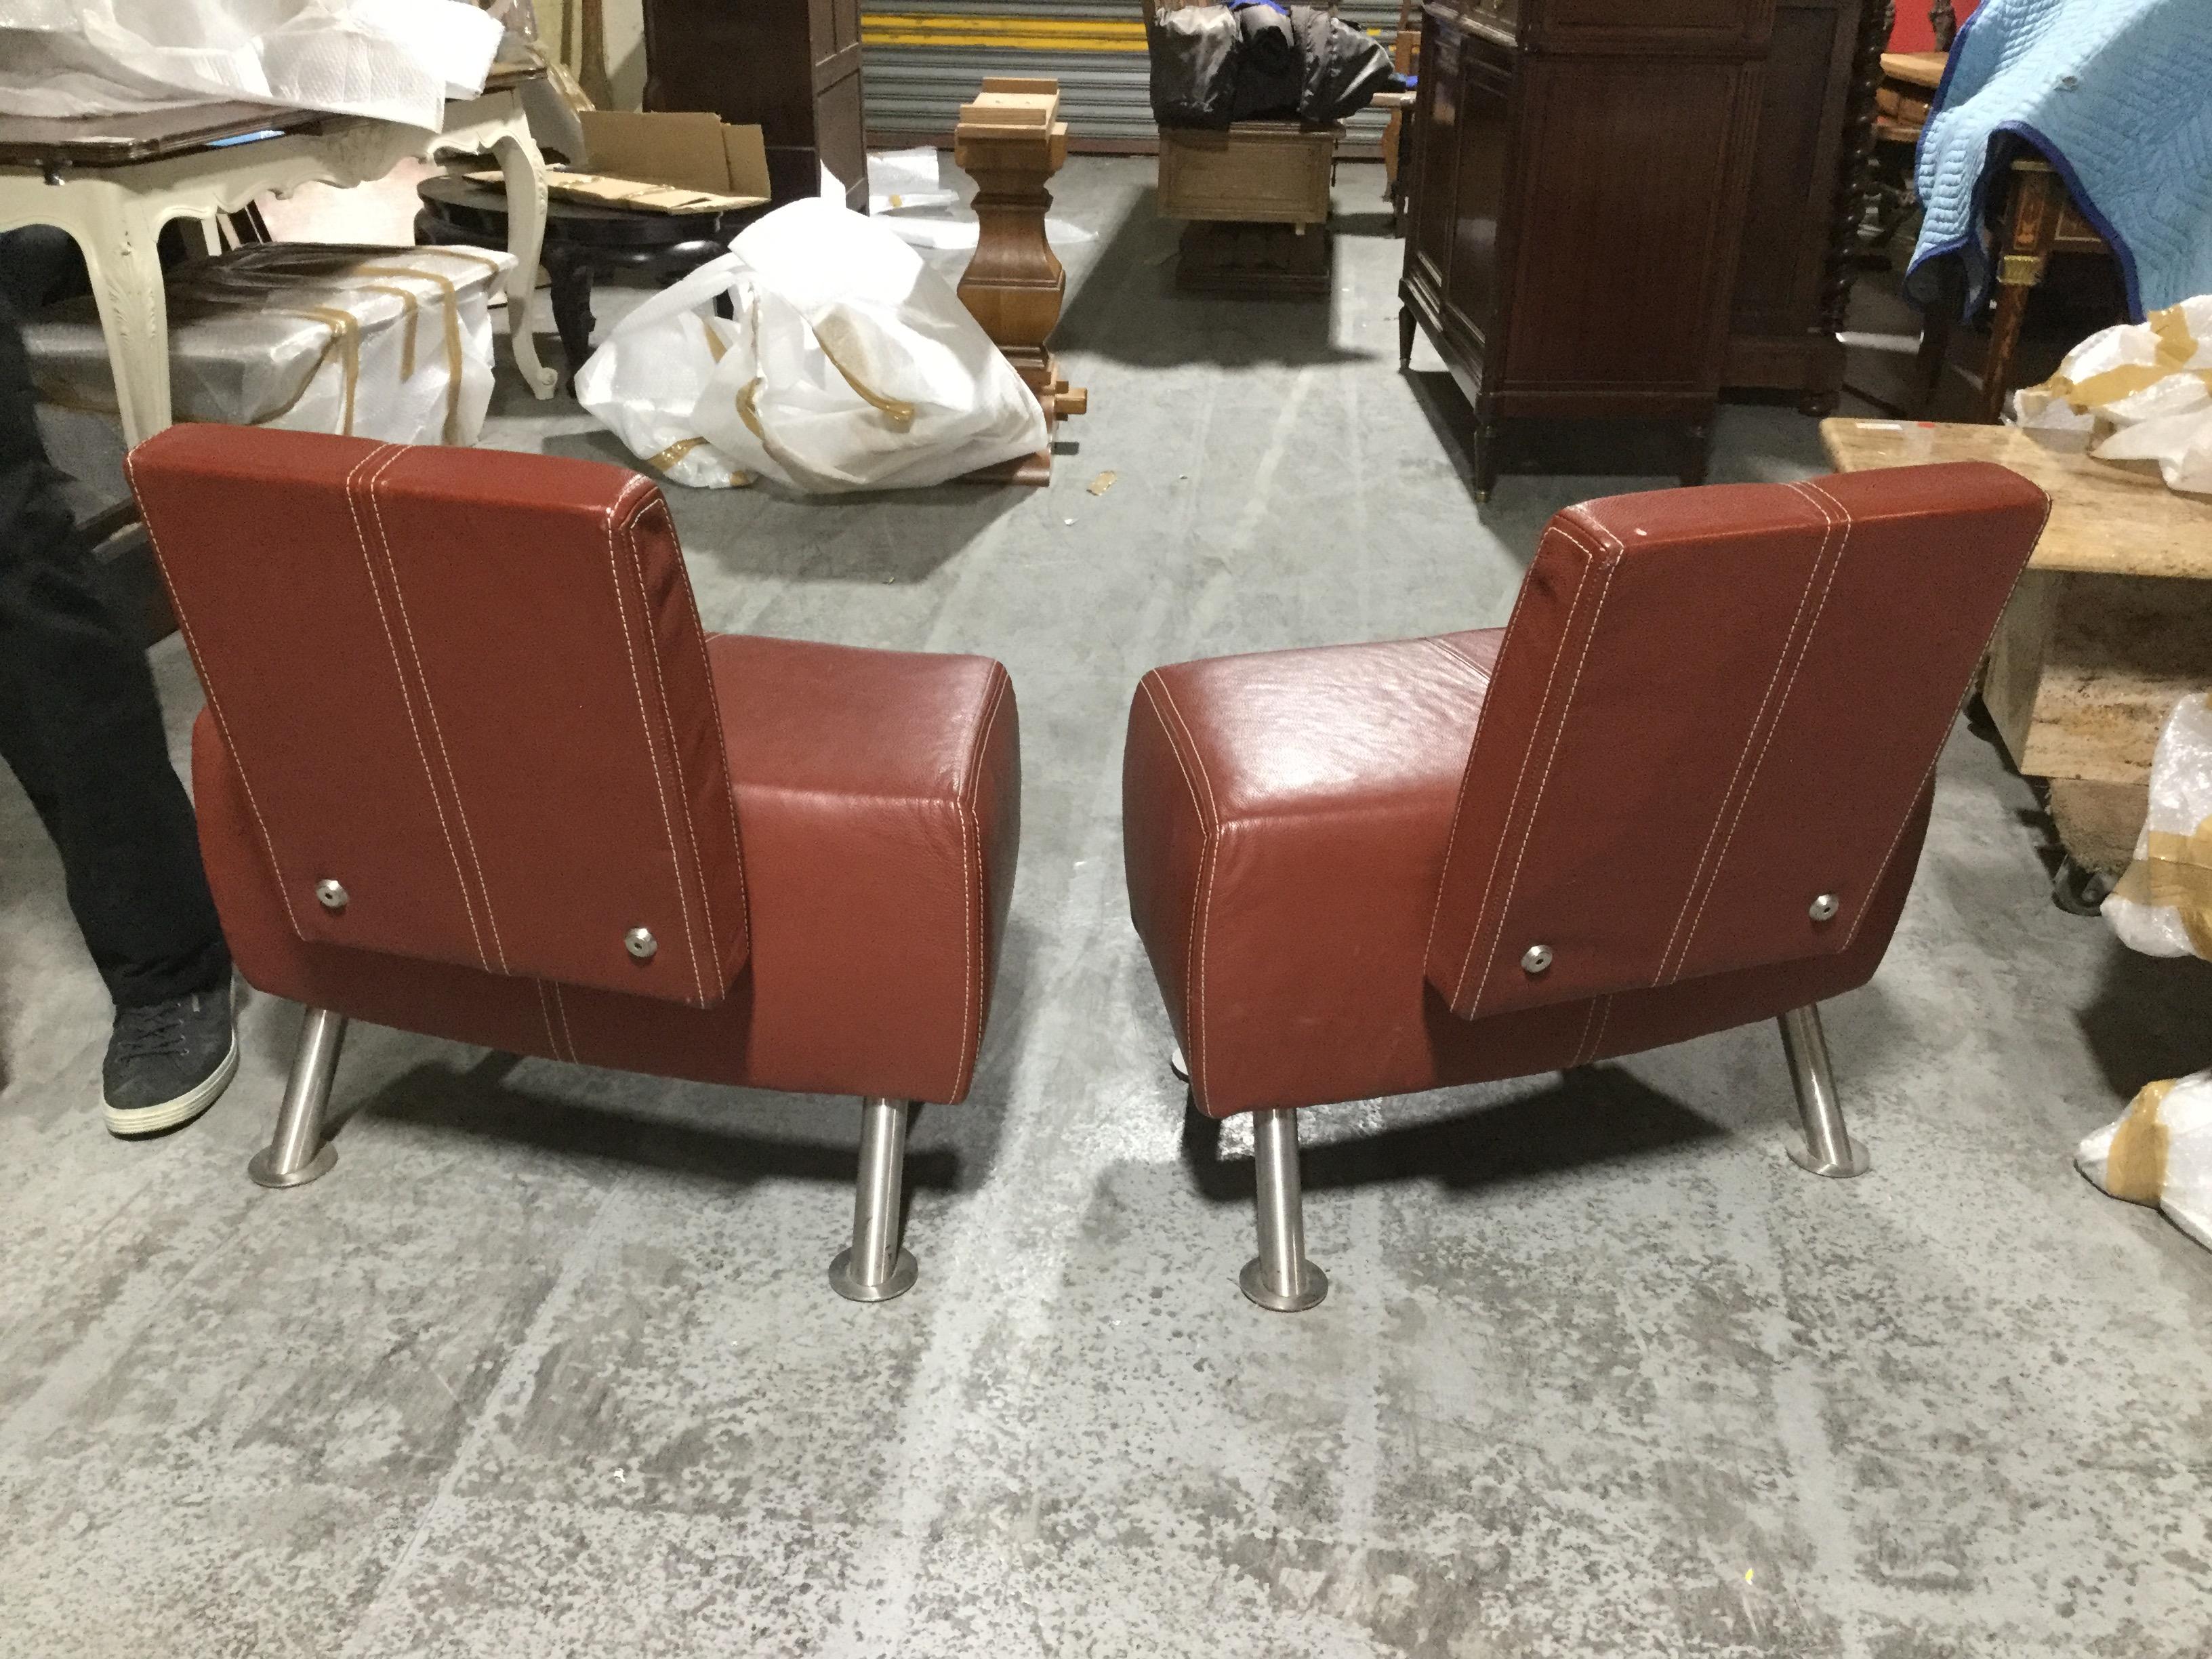 Contemporary high design Italian leather chairs in oxblood hide with top stitching and steel legs.

    